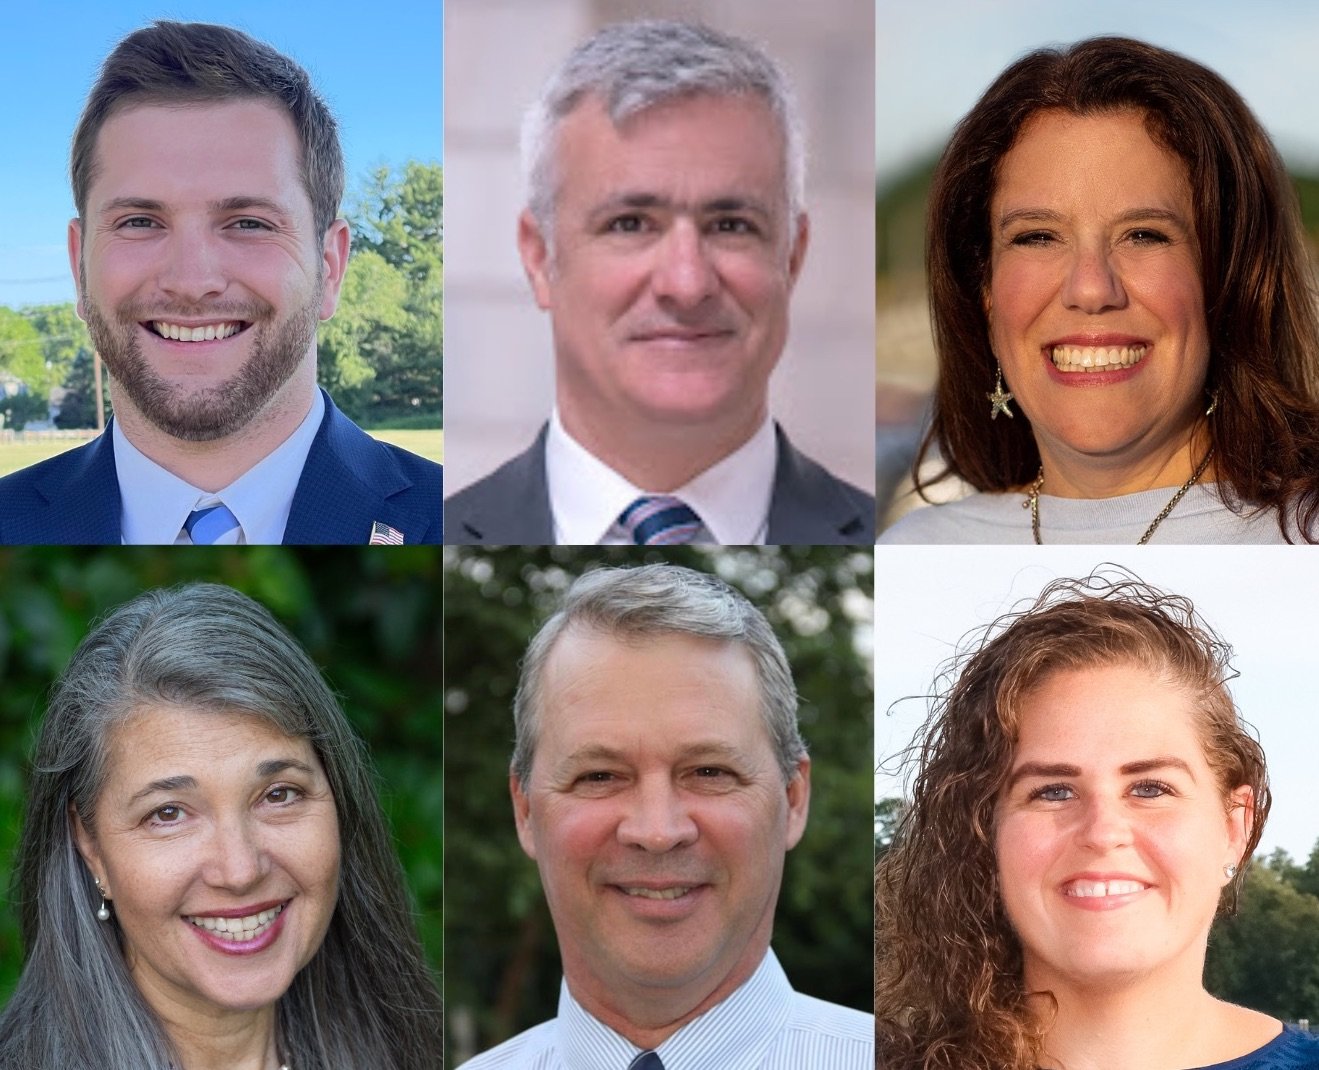 Local candidates for general assembly seats (top row, from left to right) Sam Read (House, District 66), Jason Knight (House, District 67), Pam Lauria (Senate, District 32) and (bottom row) Jennifer Boylan (House, District 66), Scott Fuller (House, District 67) and Rhonda Holmes (Senate, District 32).